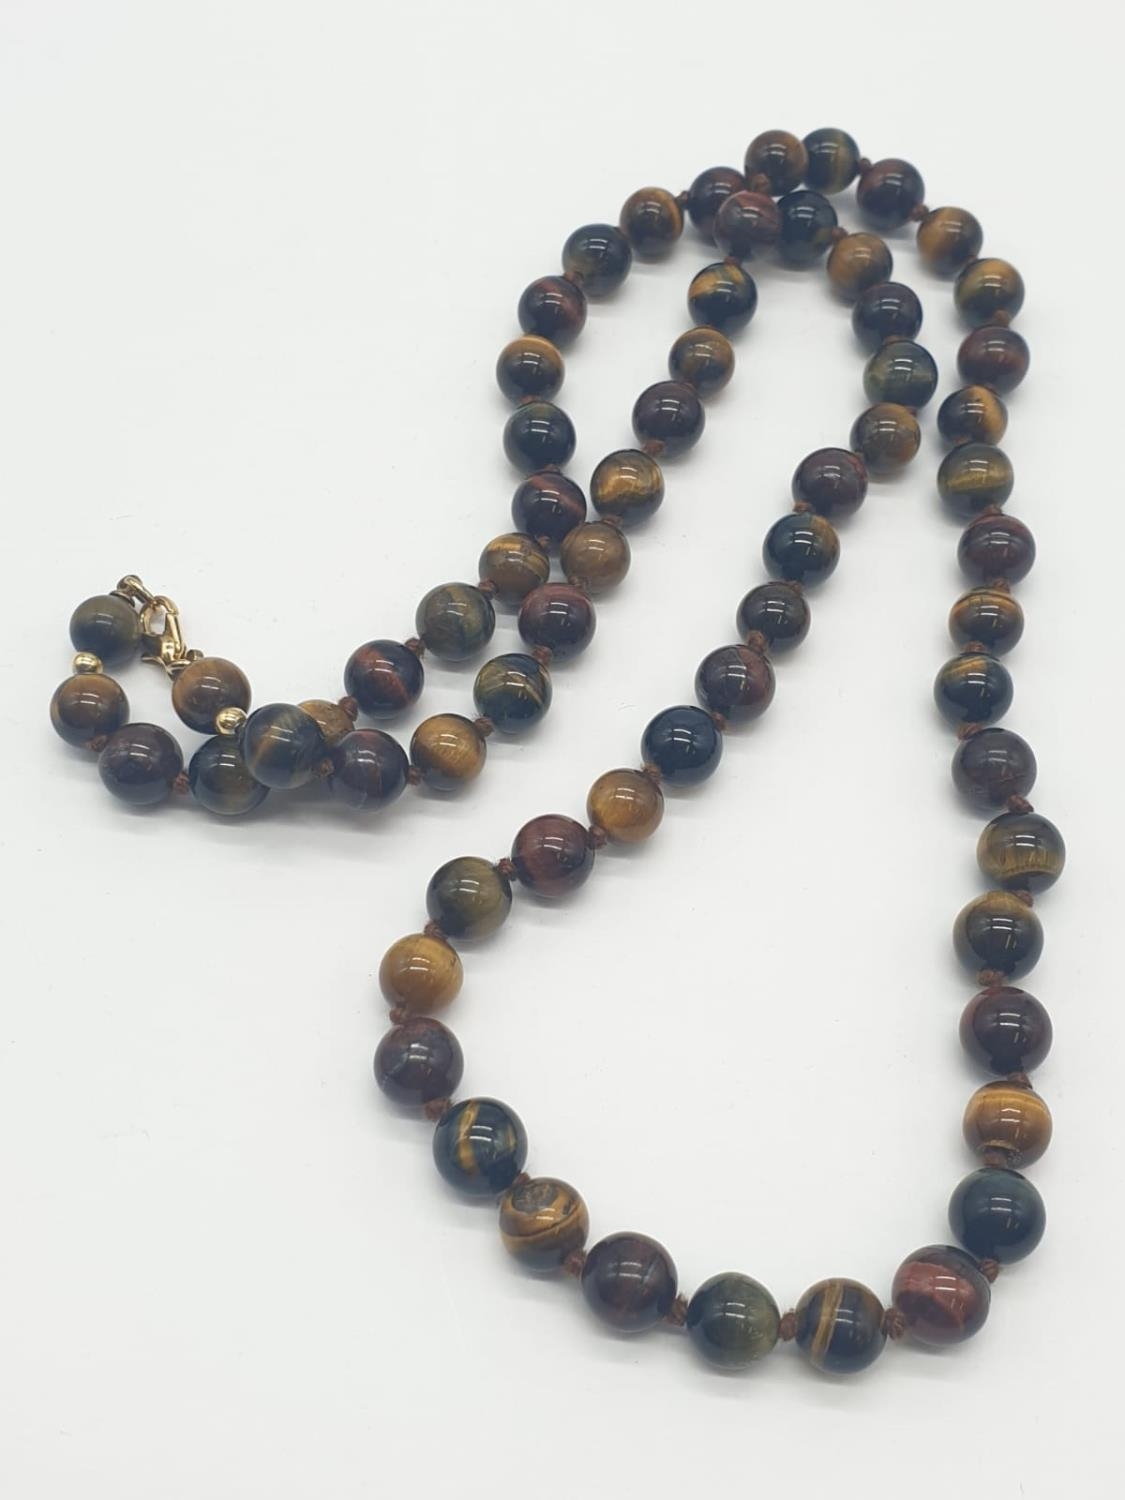 Tiger's Eye Beaded NECKLACE. 50.5g 60cm length - Image 2 of 4